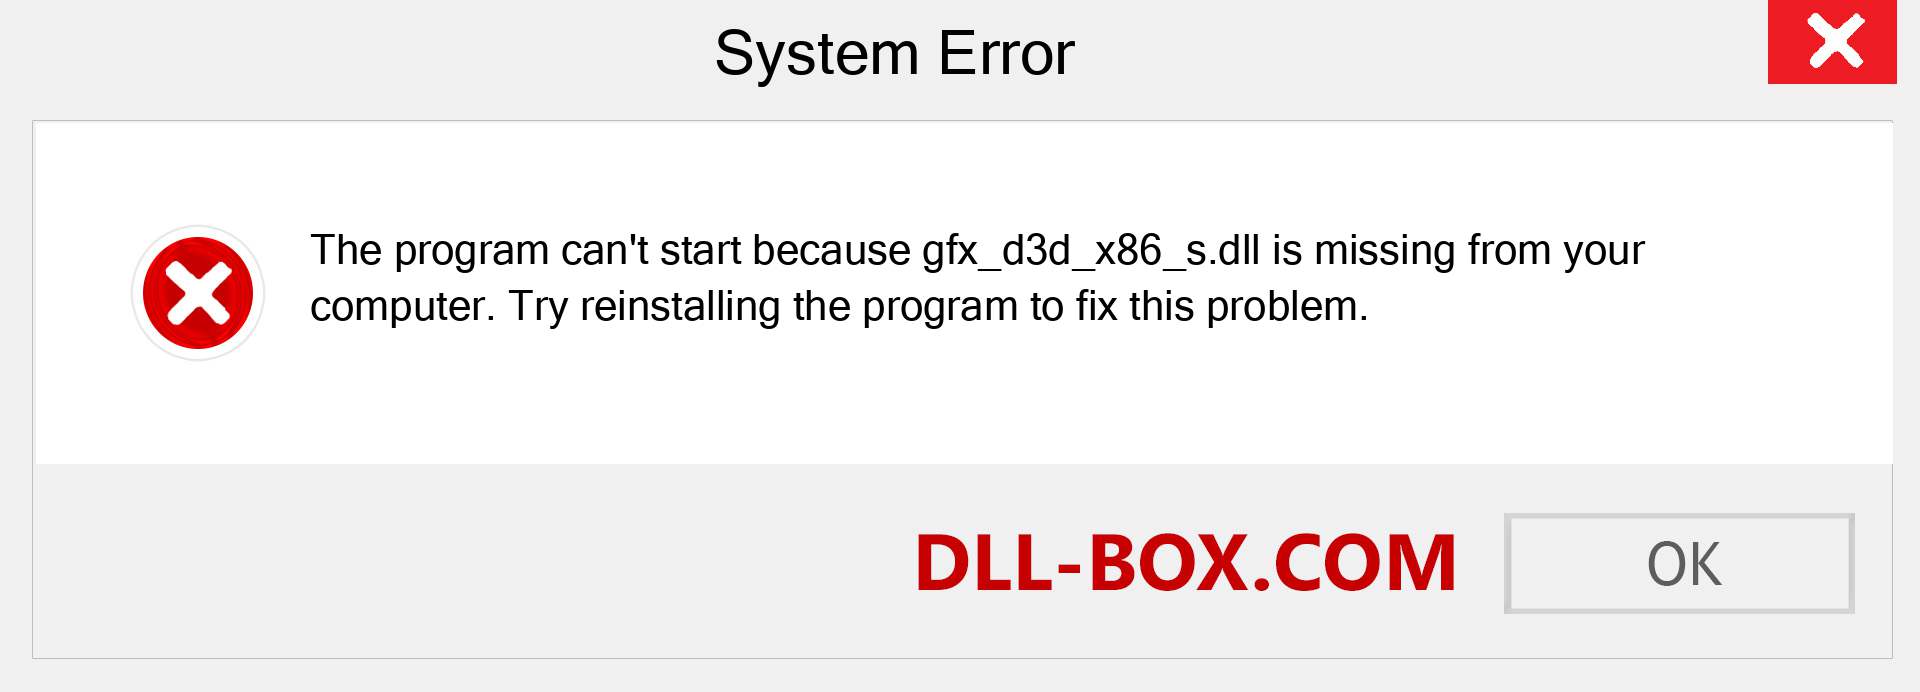  gfx_d3d_x86_s.dll file is missing?. Download for Windows 7, 8, 10 - Fix  gfx_d3d_x86_s dll Missing Error on Windows, photos, images